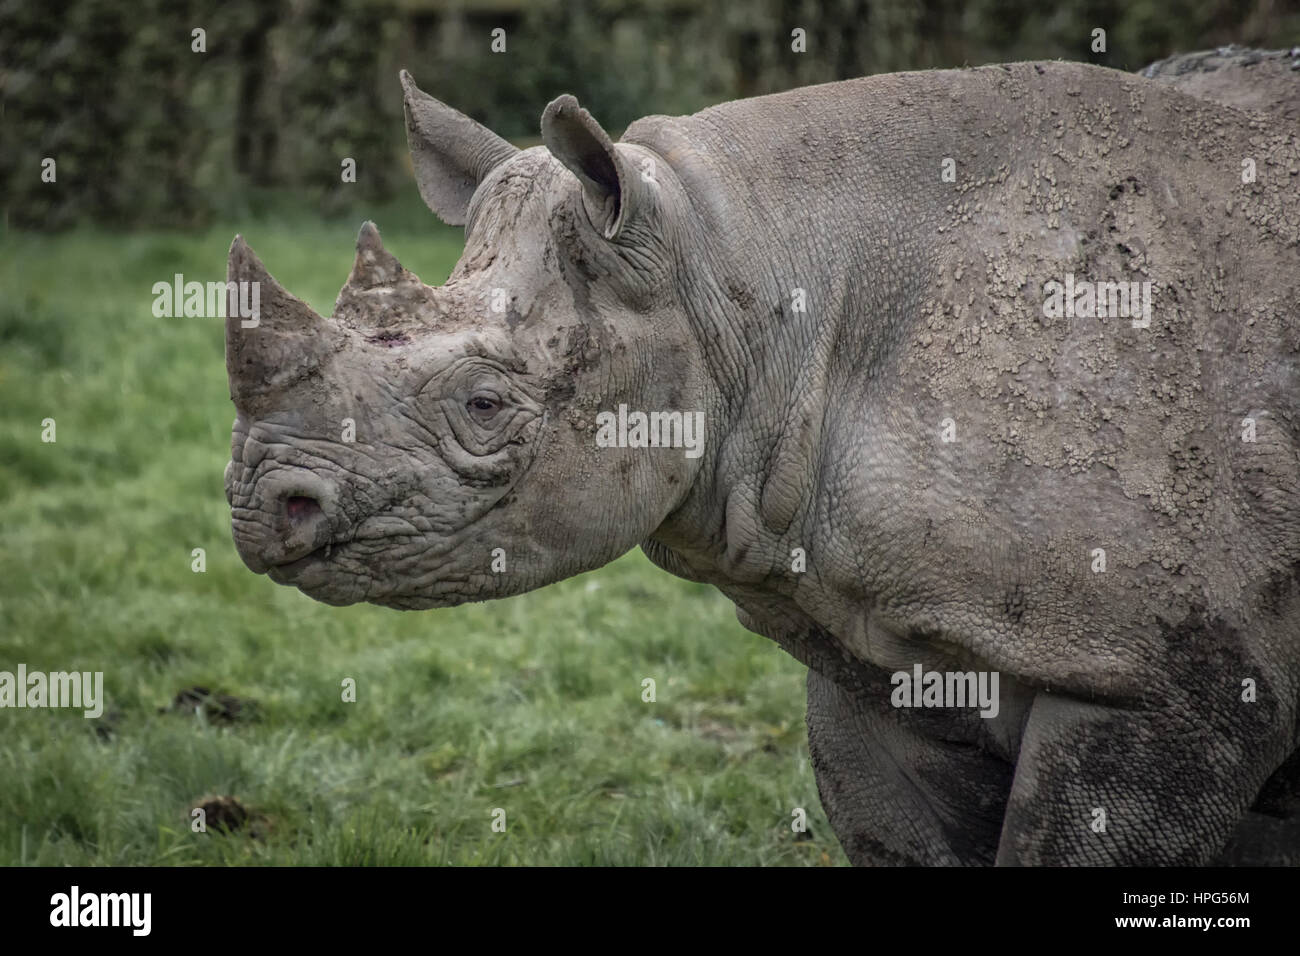 A close up half length profile image of a rhino staring left with mud and dirt on its hide Stock Photo